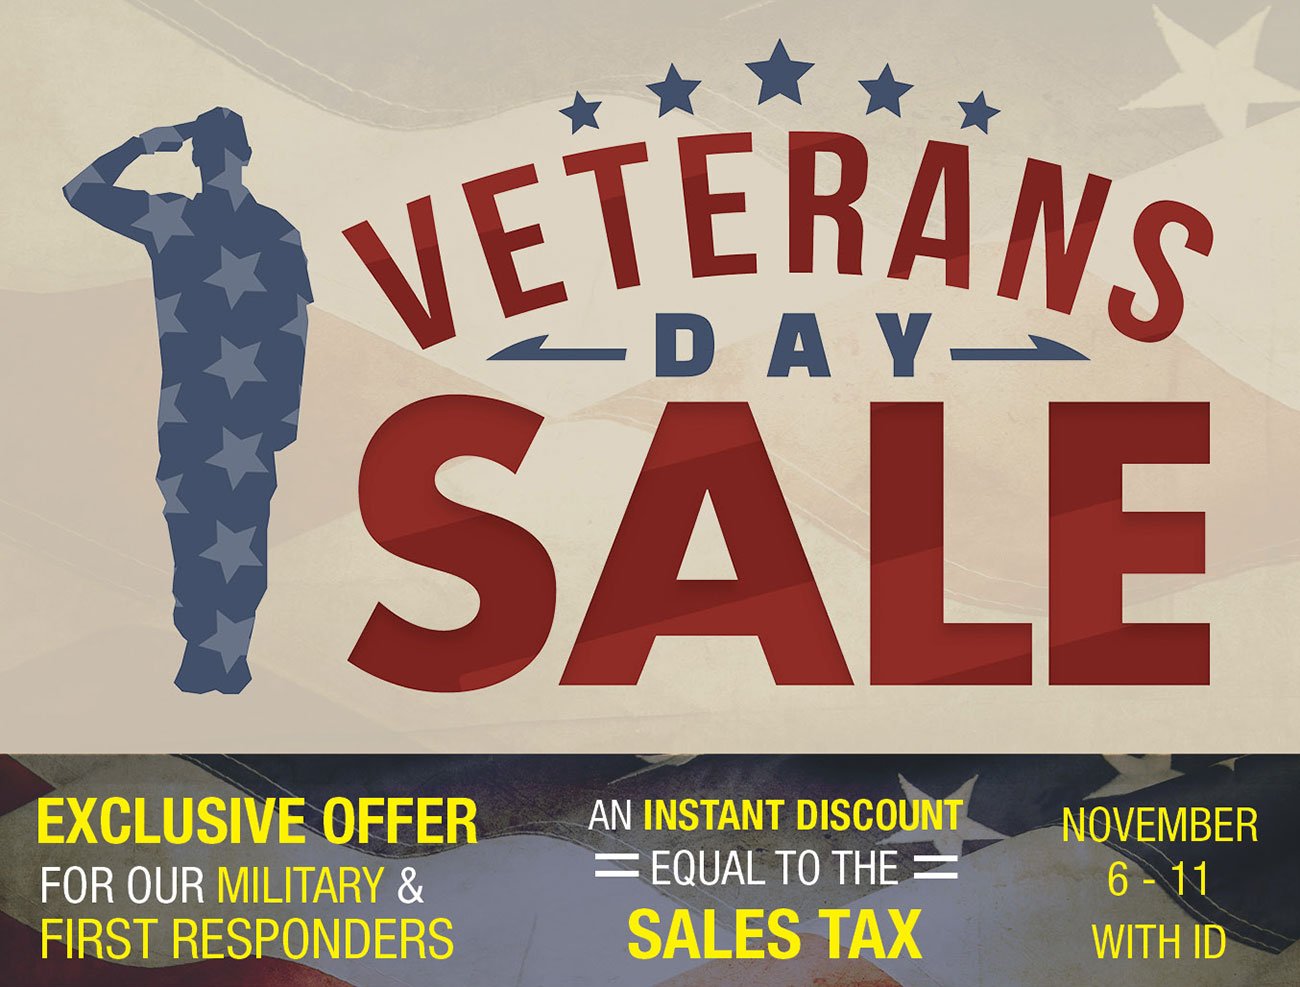 Veterans Day Sale! Exclusive Offer for Our Military and First